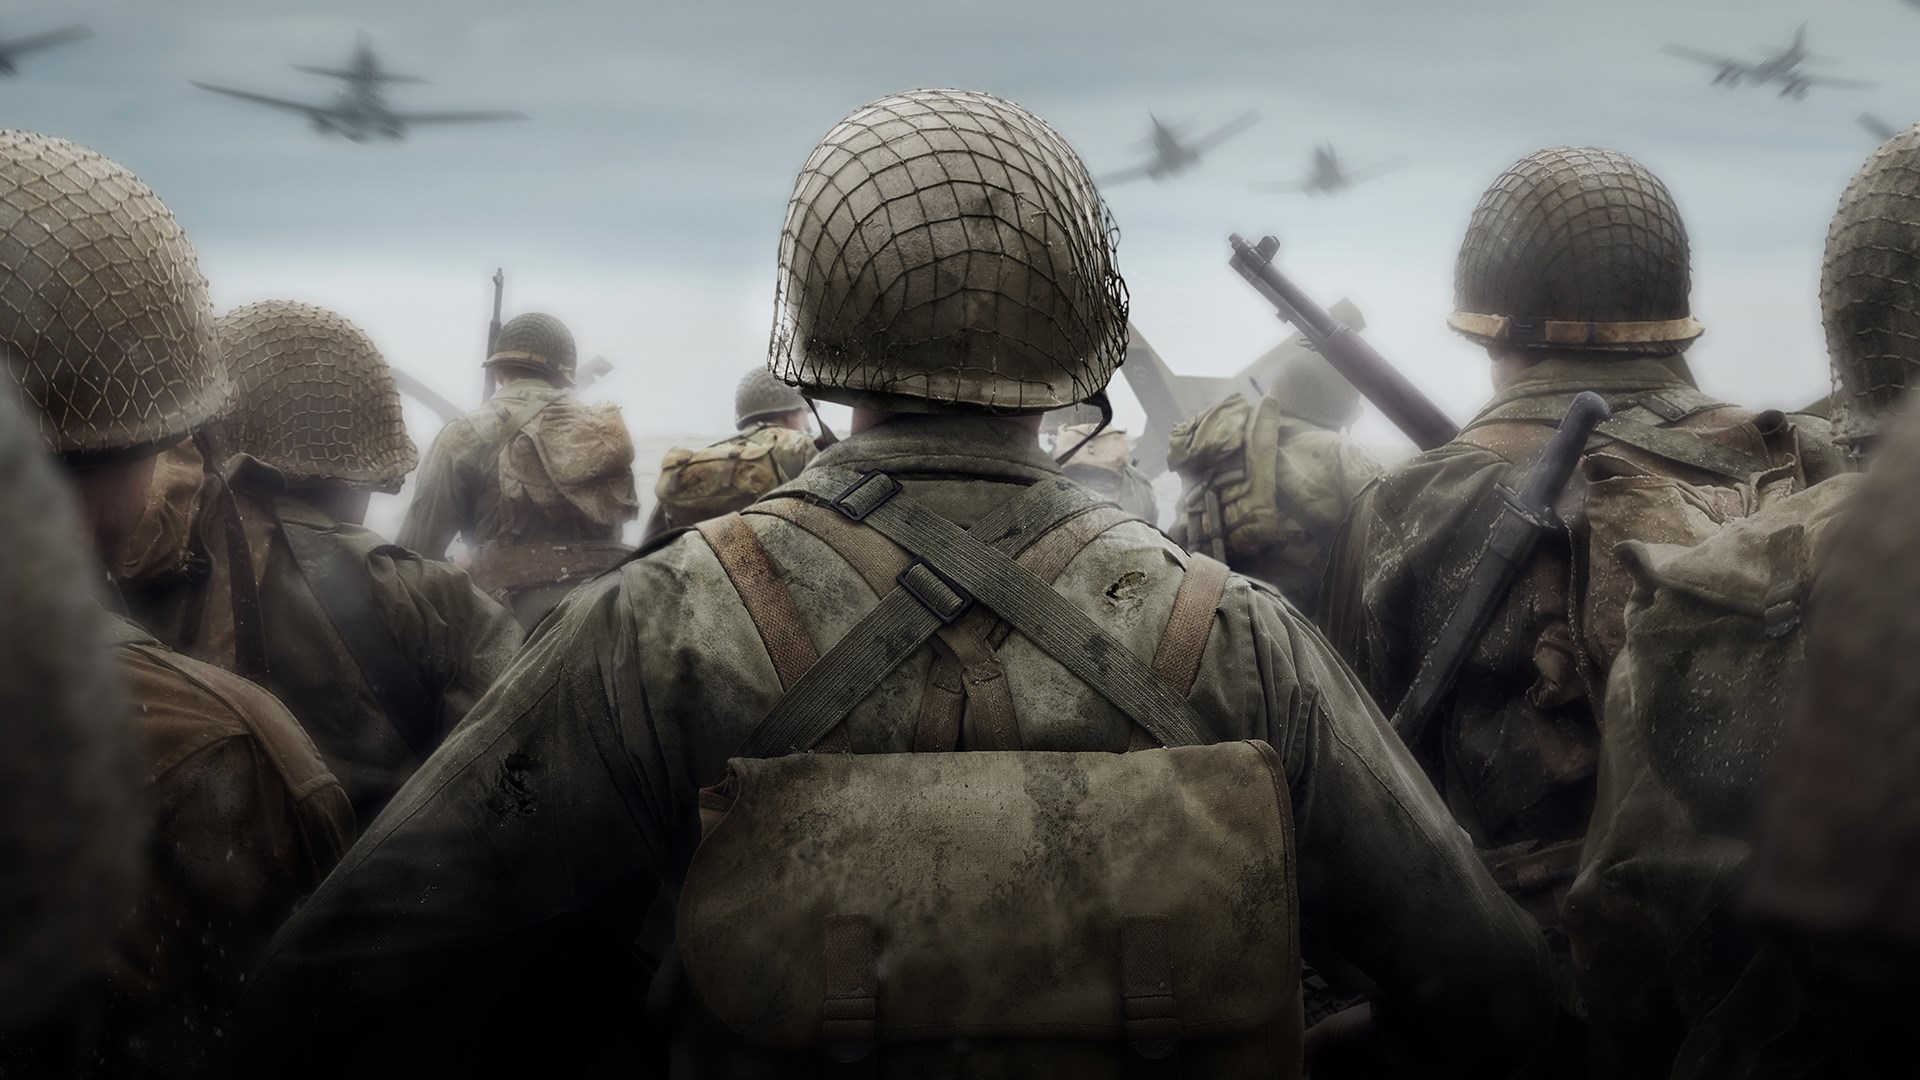 Parents' Guide: Call of Duty WWII (PEGI 18+)